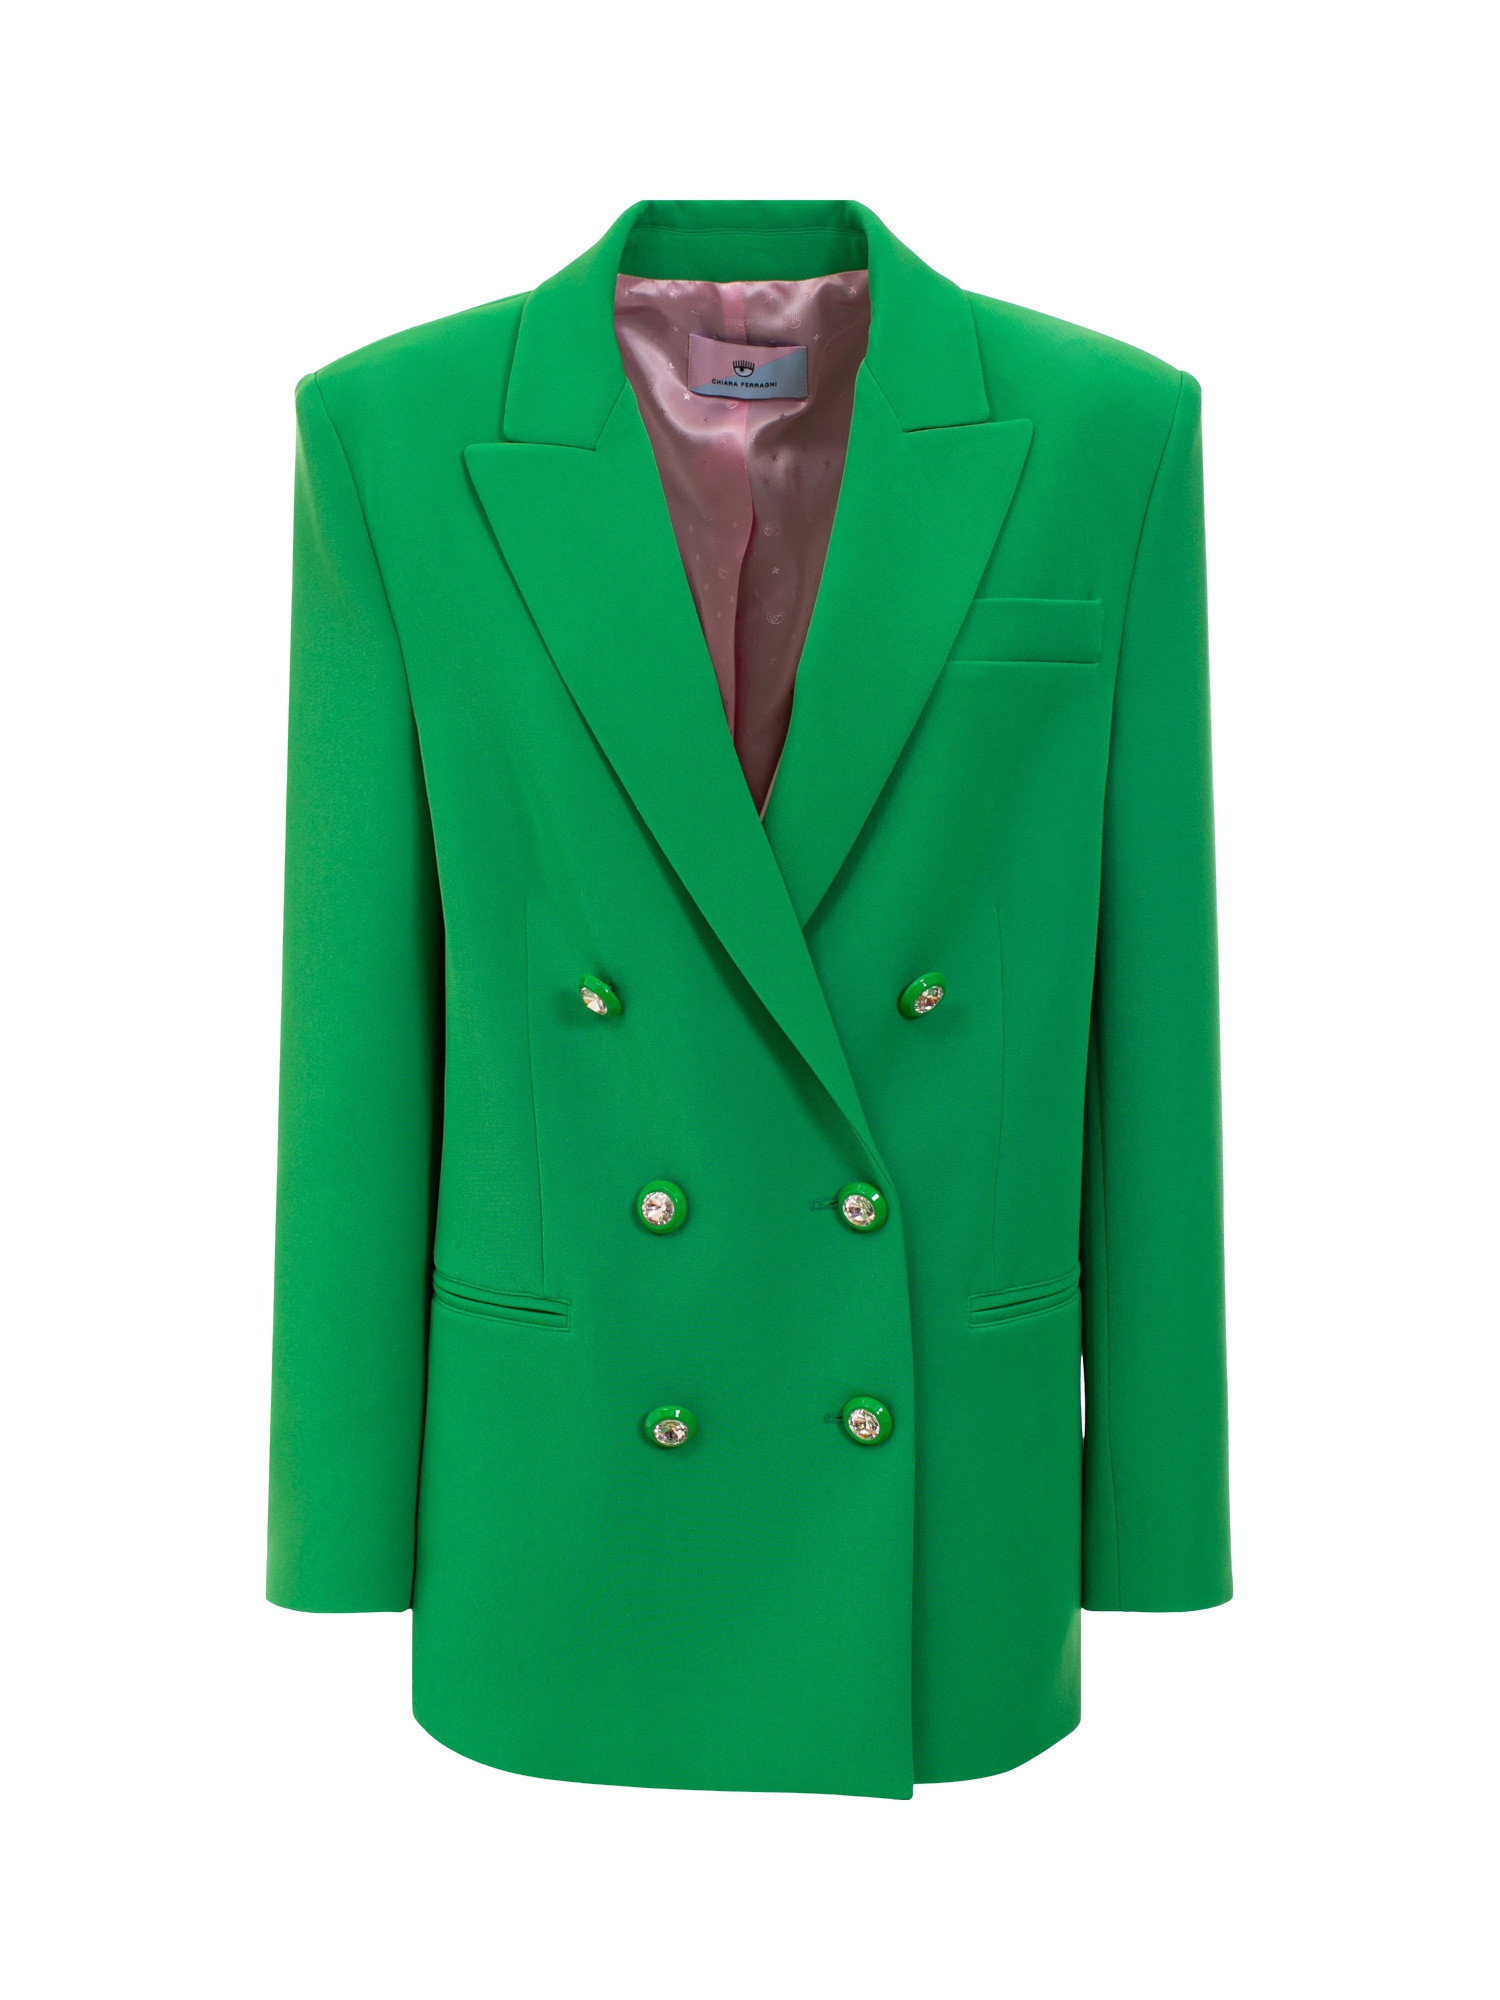 Chiara Ferragni - Double-breasted jacket with jewel buttons, Green, large image number 0